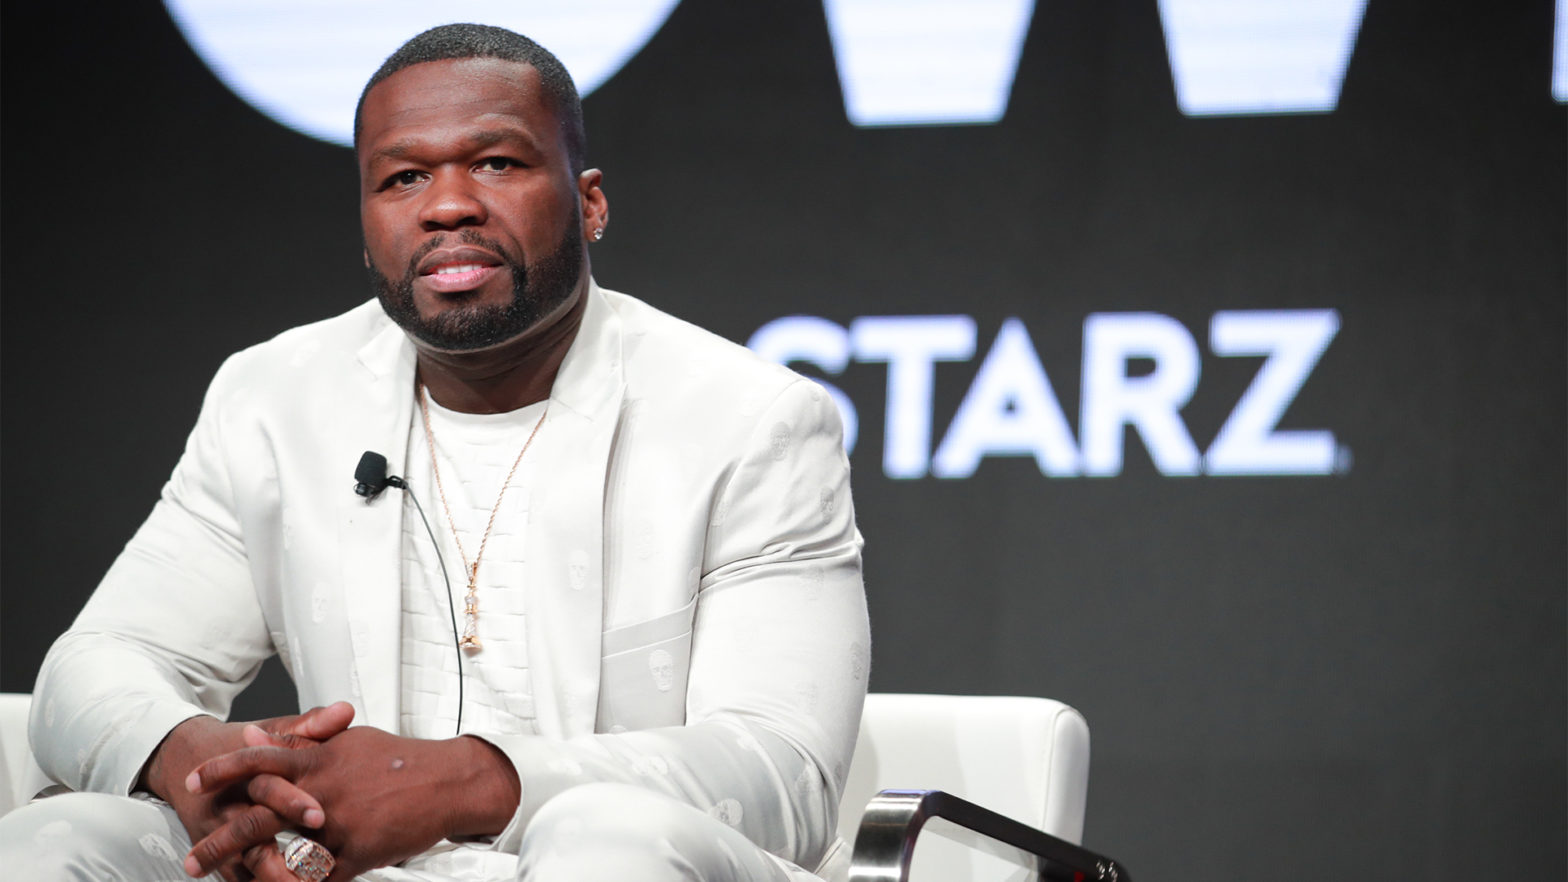 50 Cent Speaks On Being Blamed For Not So Successful Careers Of G-Unit Artists: 'I Can't Make People Buy Records'